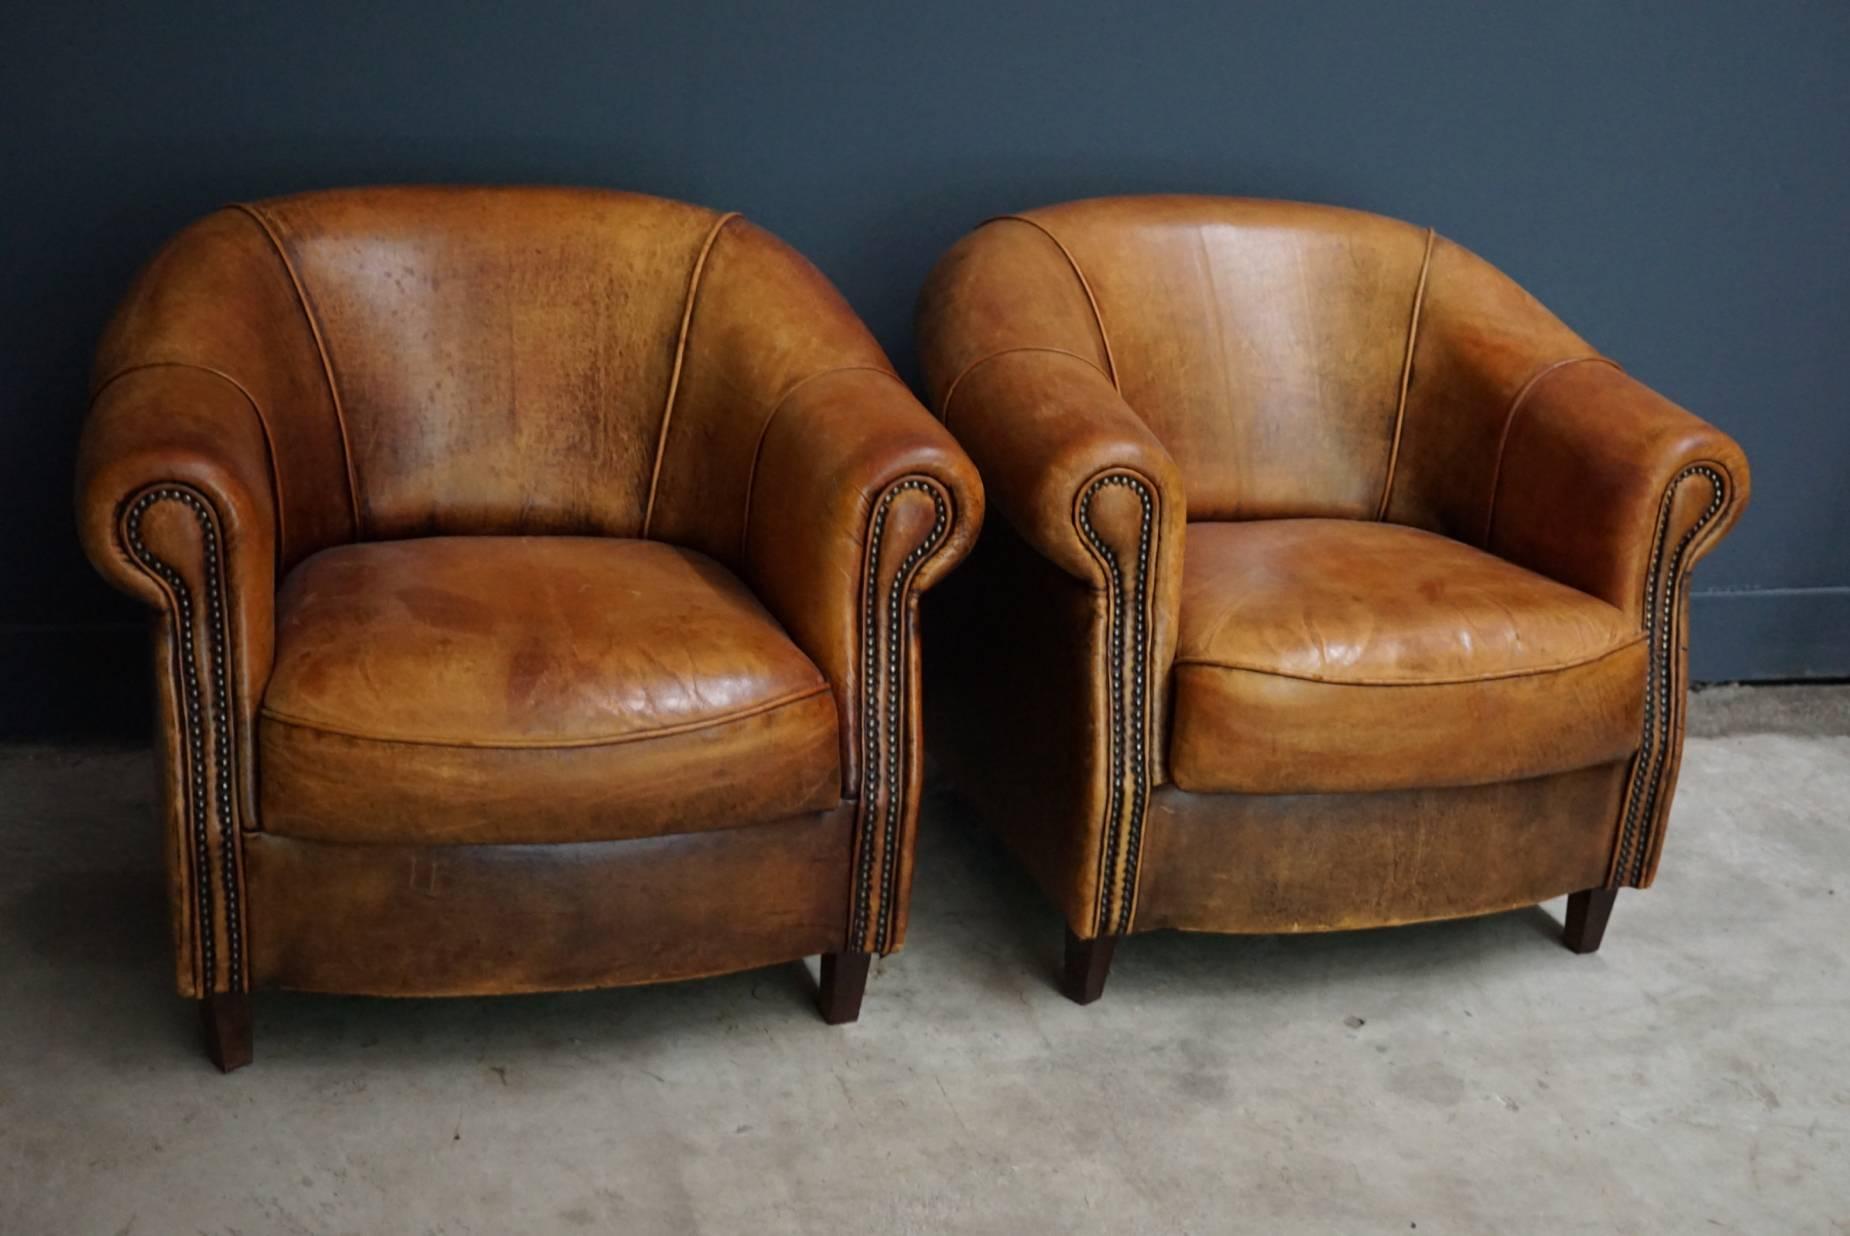 This pair of cognac-colored leather club chairs comes from the Netherlands. They feature rivets and wooden legs.